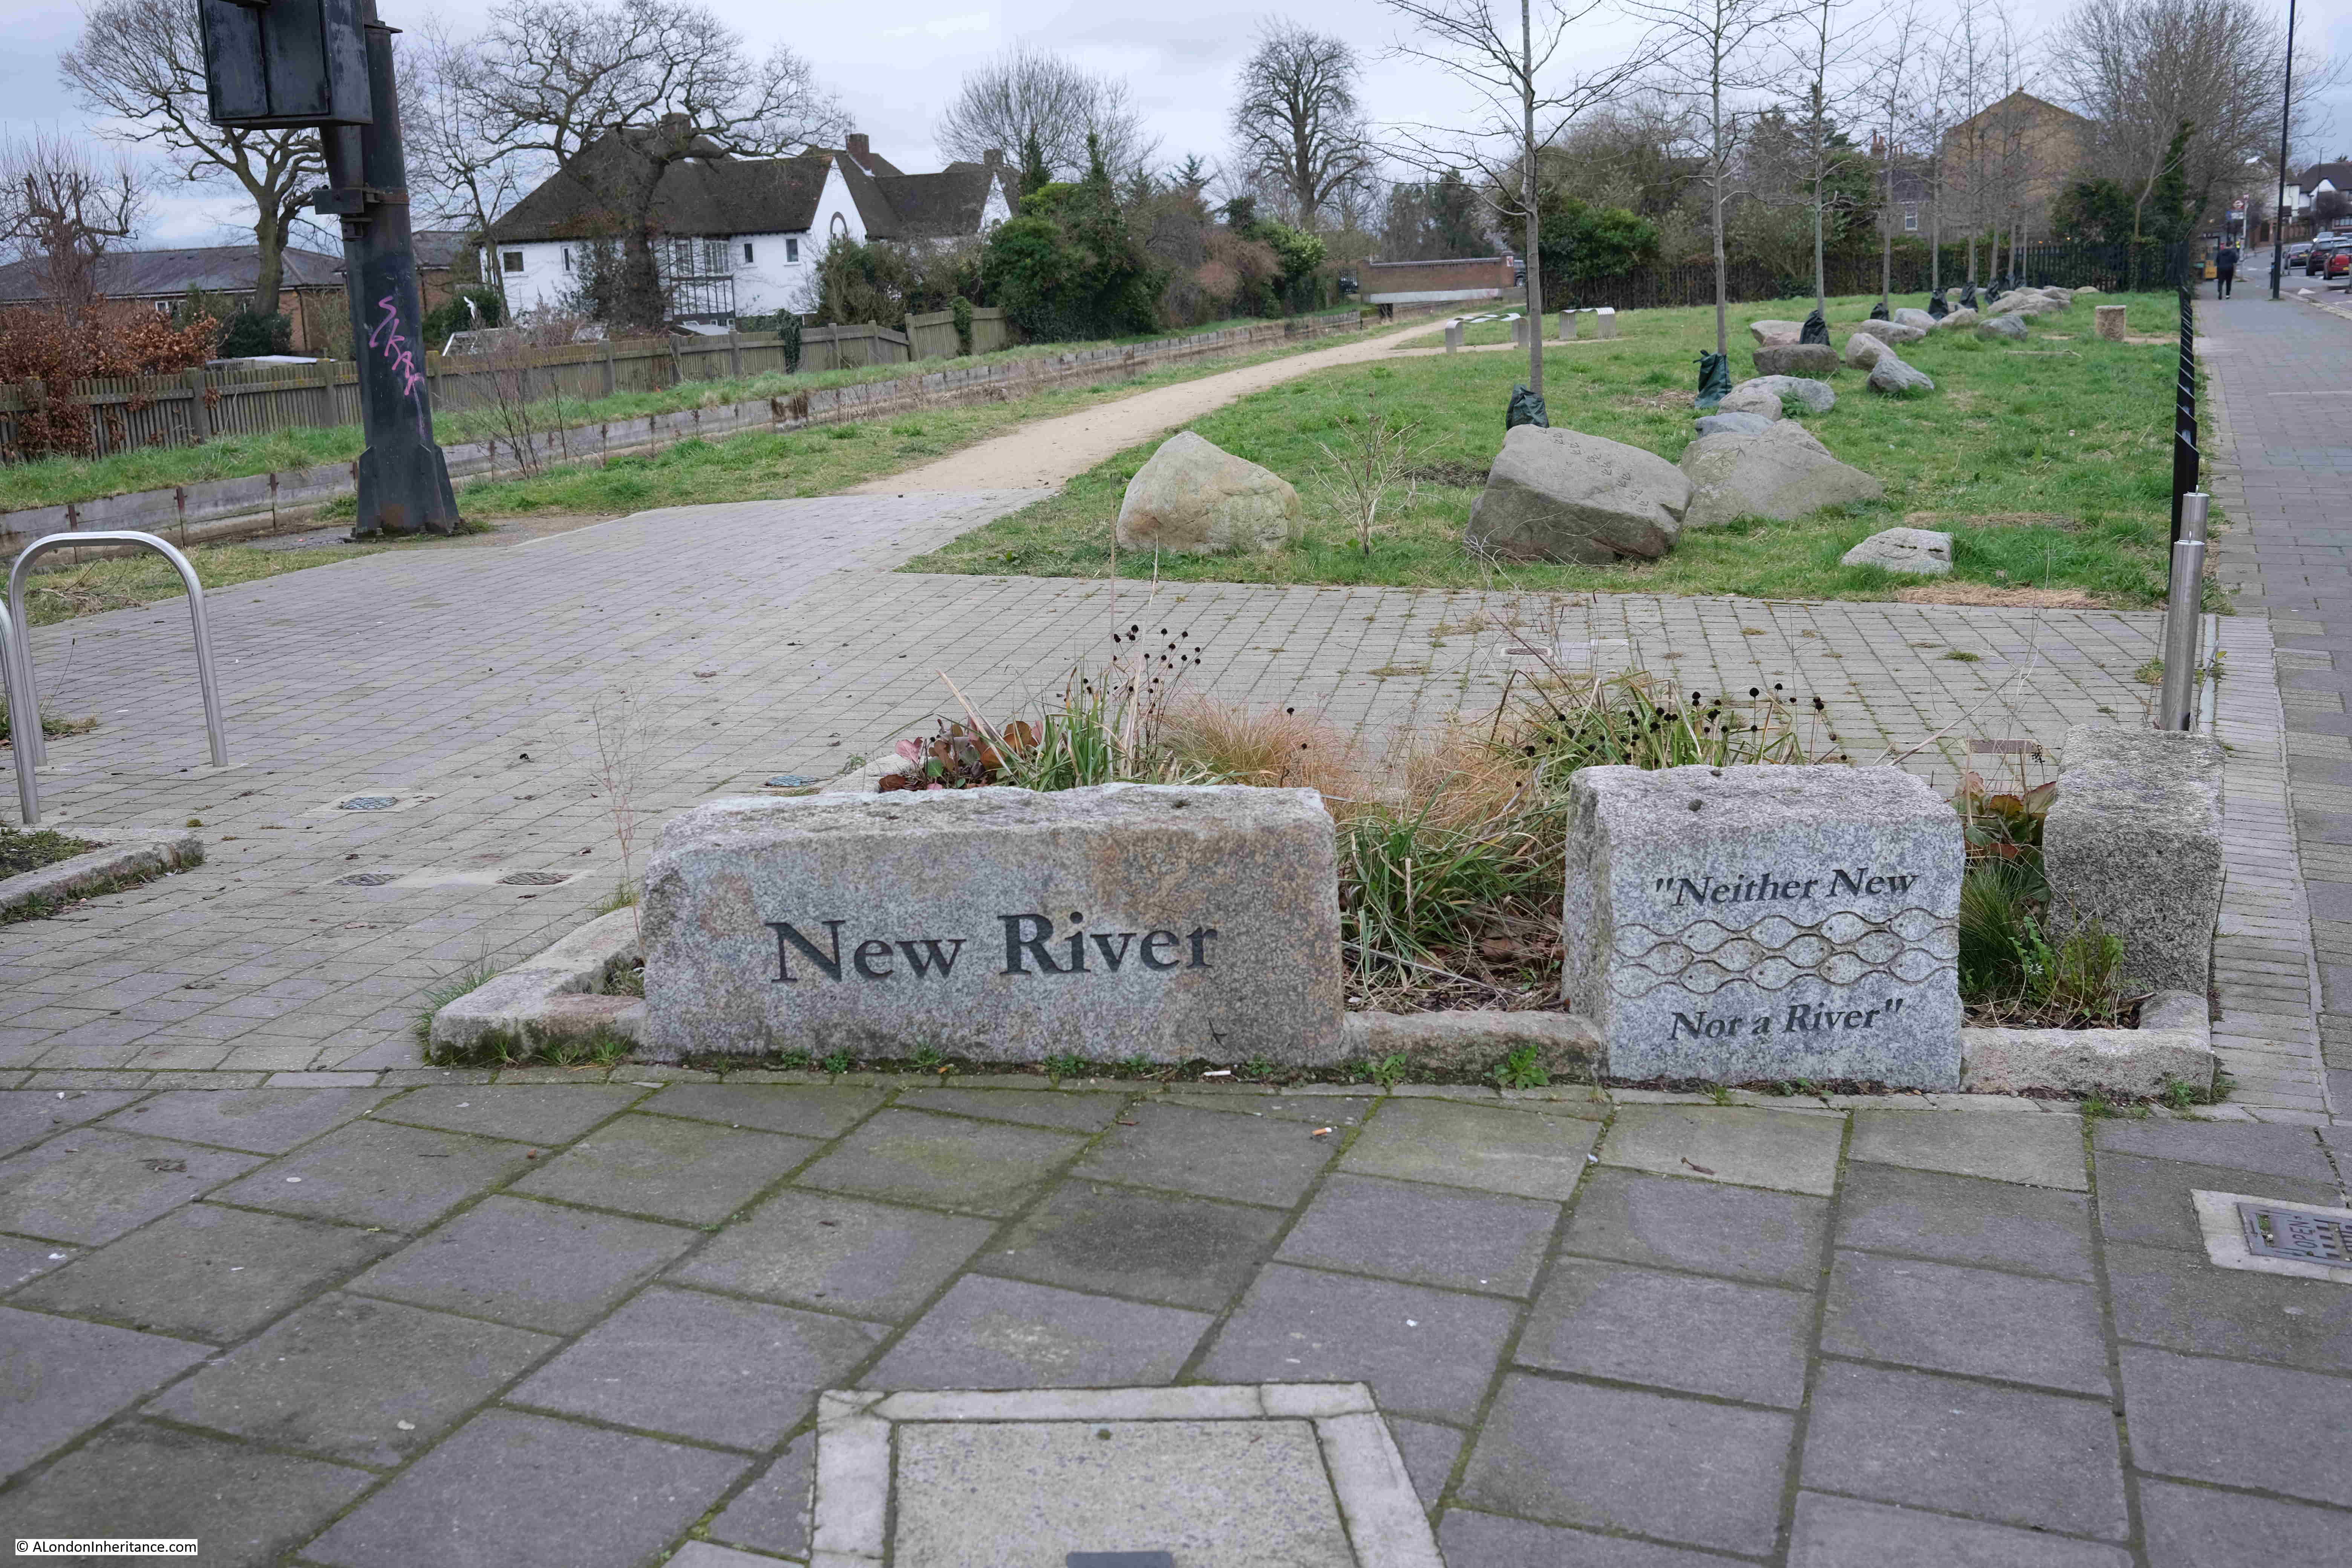 New River by Green Lanes